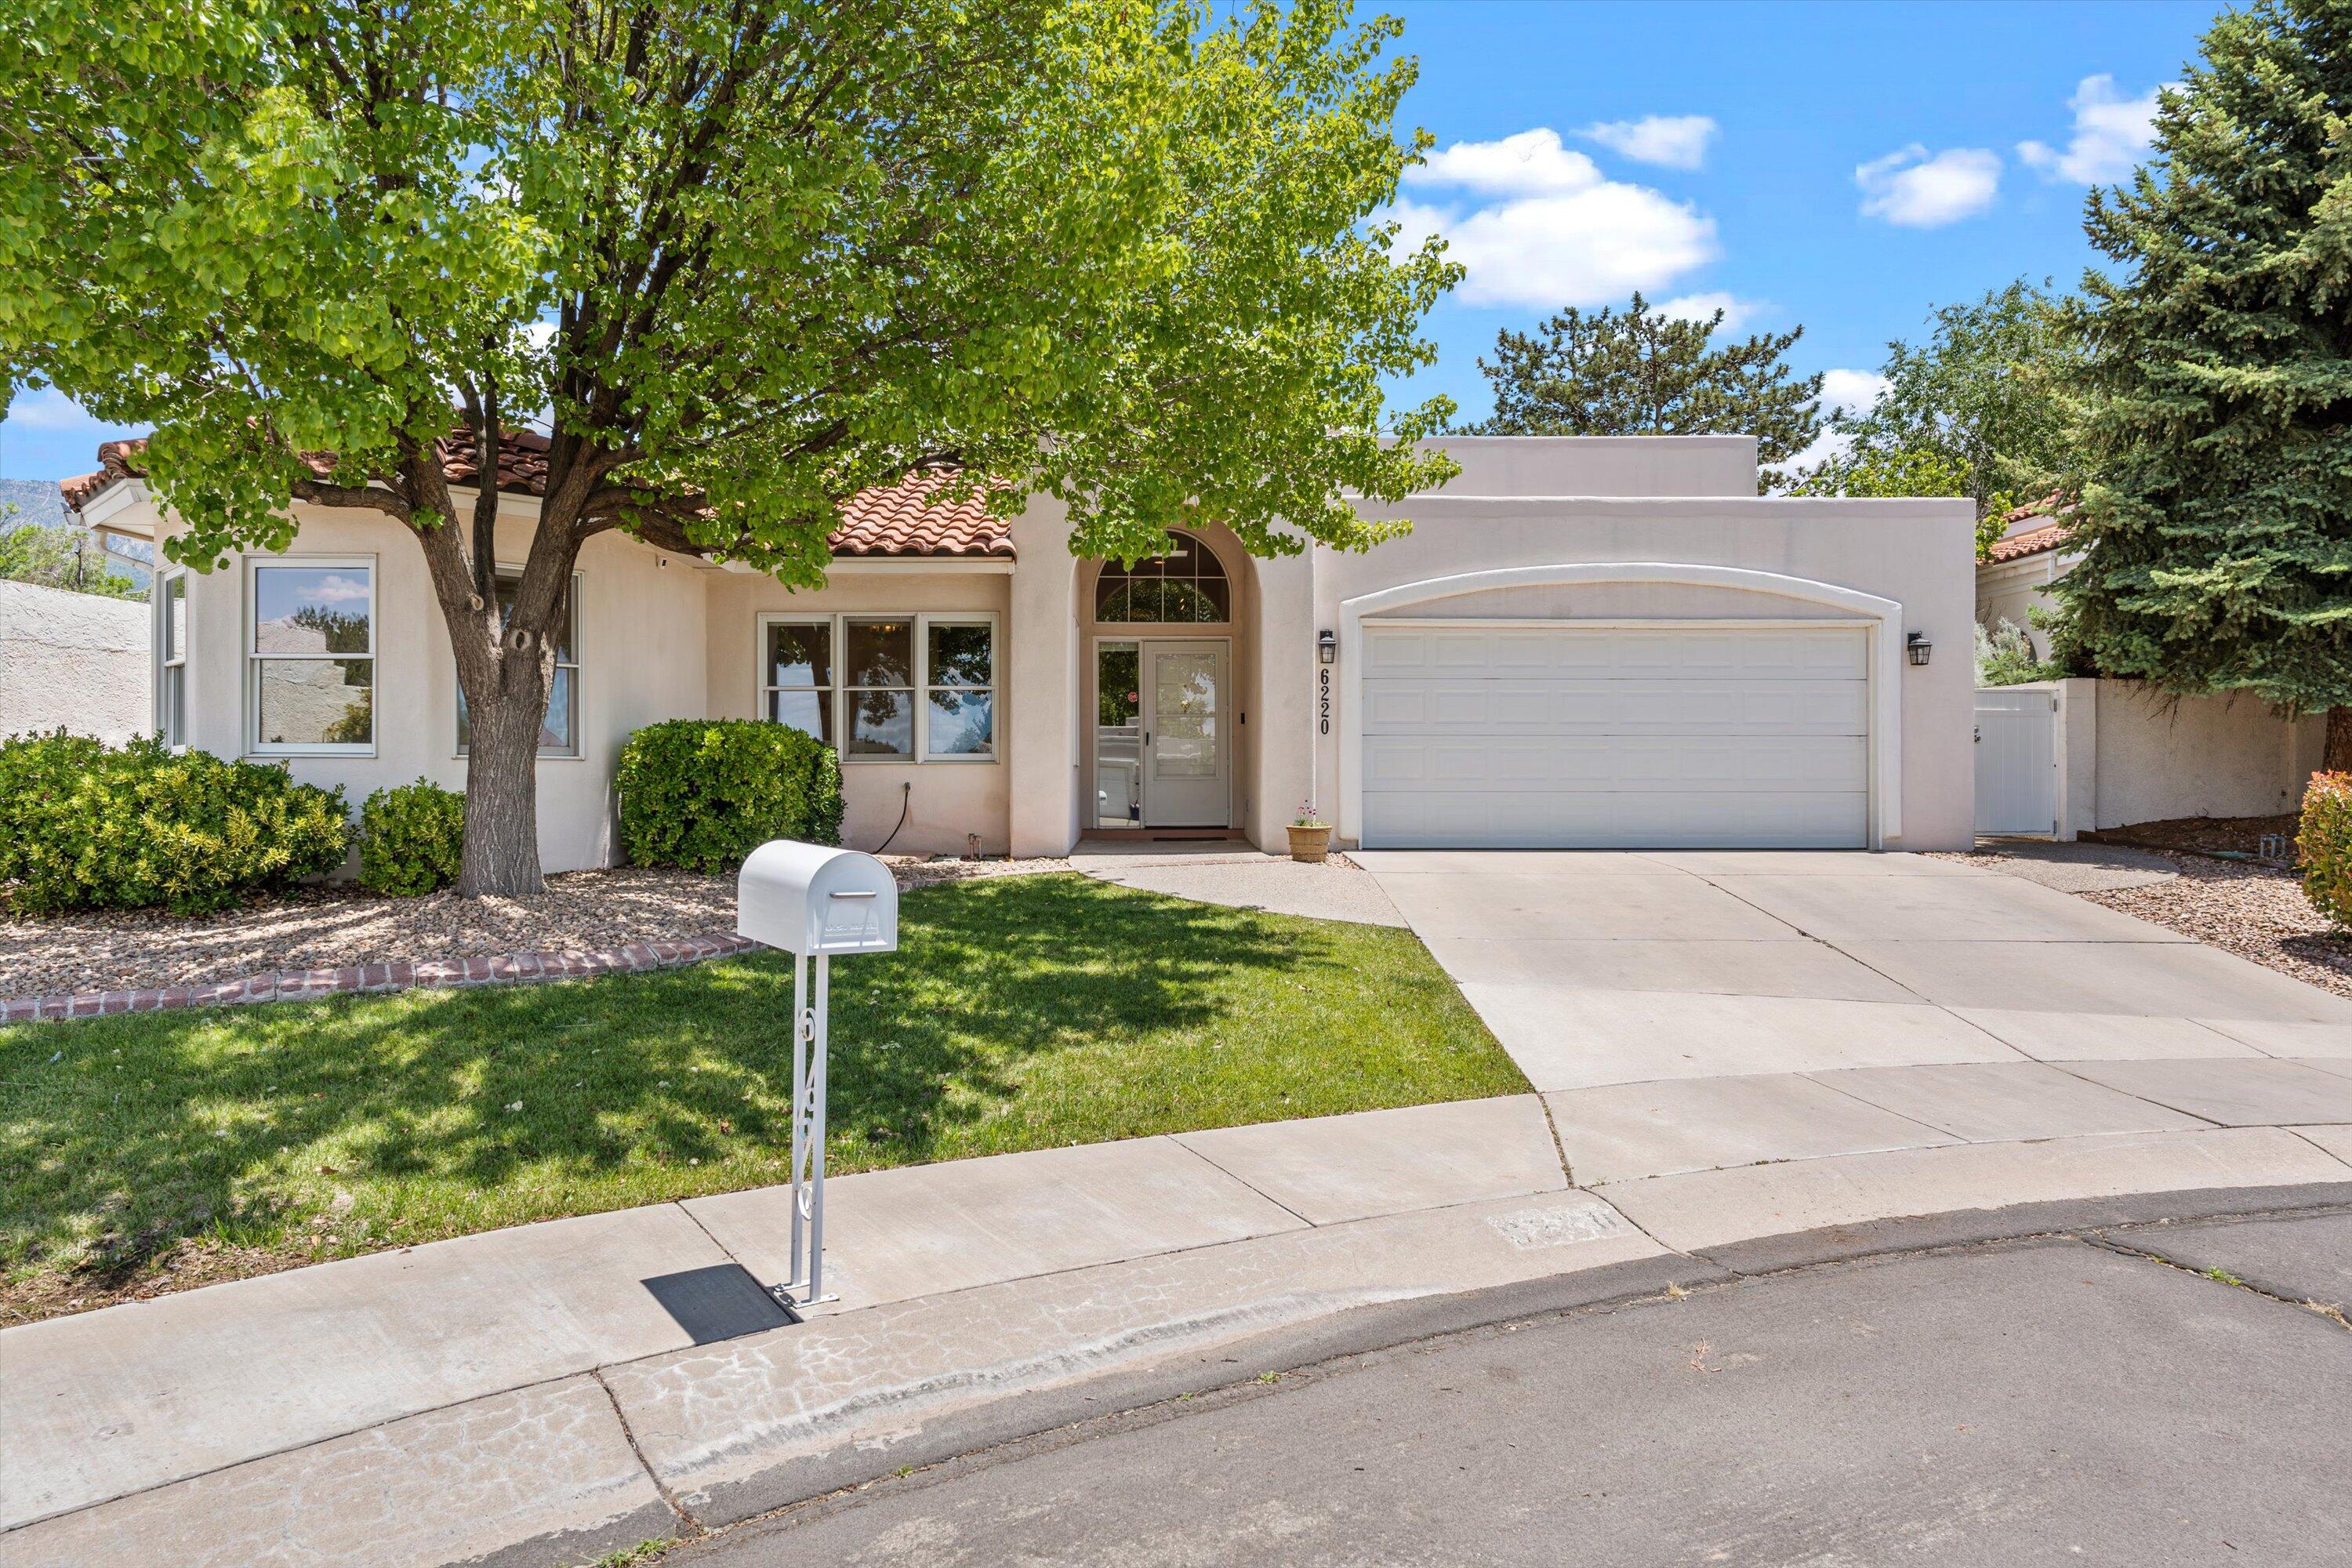 Beautiful well kept home located in the prestigious NE Heights Neighborhood of Peppertree. Updated large Kitchen with lots of cabinets and counter space, breakfast bar, and good sized pantry. Raised Beam Ceilings Throughout, Kiva Fireplace, Updated tile floors With Radiant Heat, and lots of natural lighting. You will love the oversized master bedroom with large master bath and walk-in closet. Great amount of attic storage space. Very private and serene back patio completely landscaped. Refrigerated Air unit that was recently done, Roof that was recently repaired, Central Vacuum, 2 Car Garage. Come see it before it's gone!